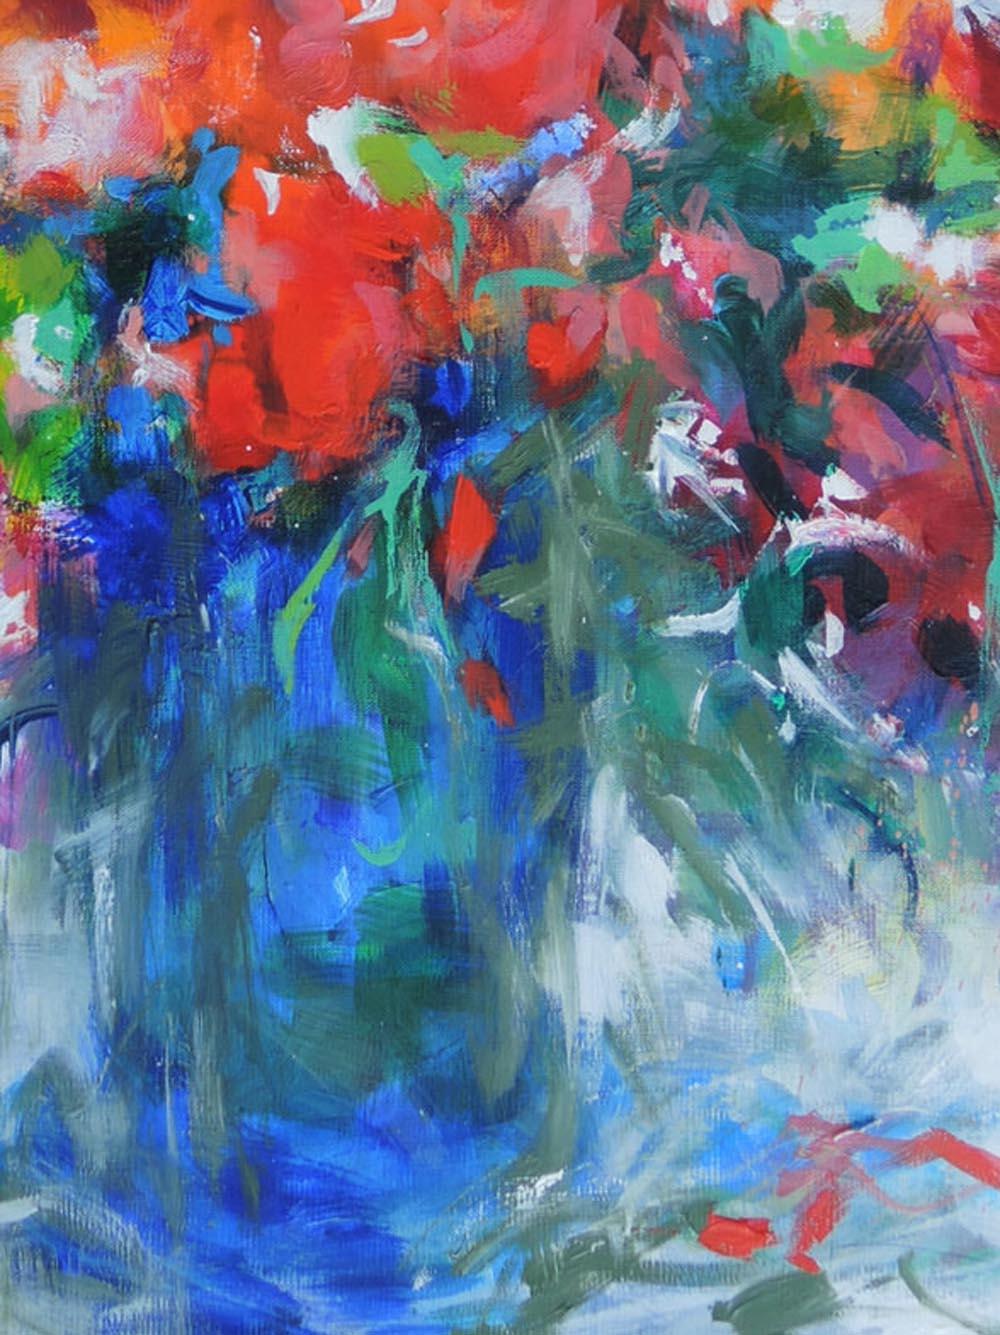 Bouquet in a Blue Vase, colourful abstract flower painting on canvas, Floral art - Abstract Impressionist Painting by Mary Chaplin